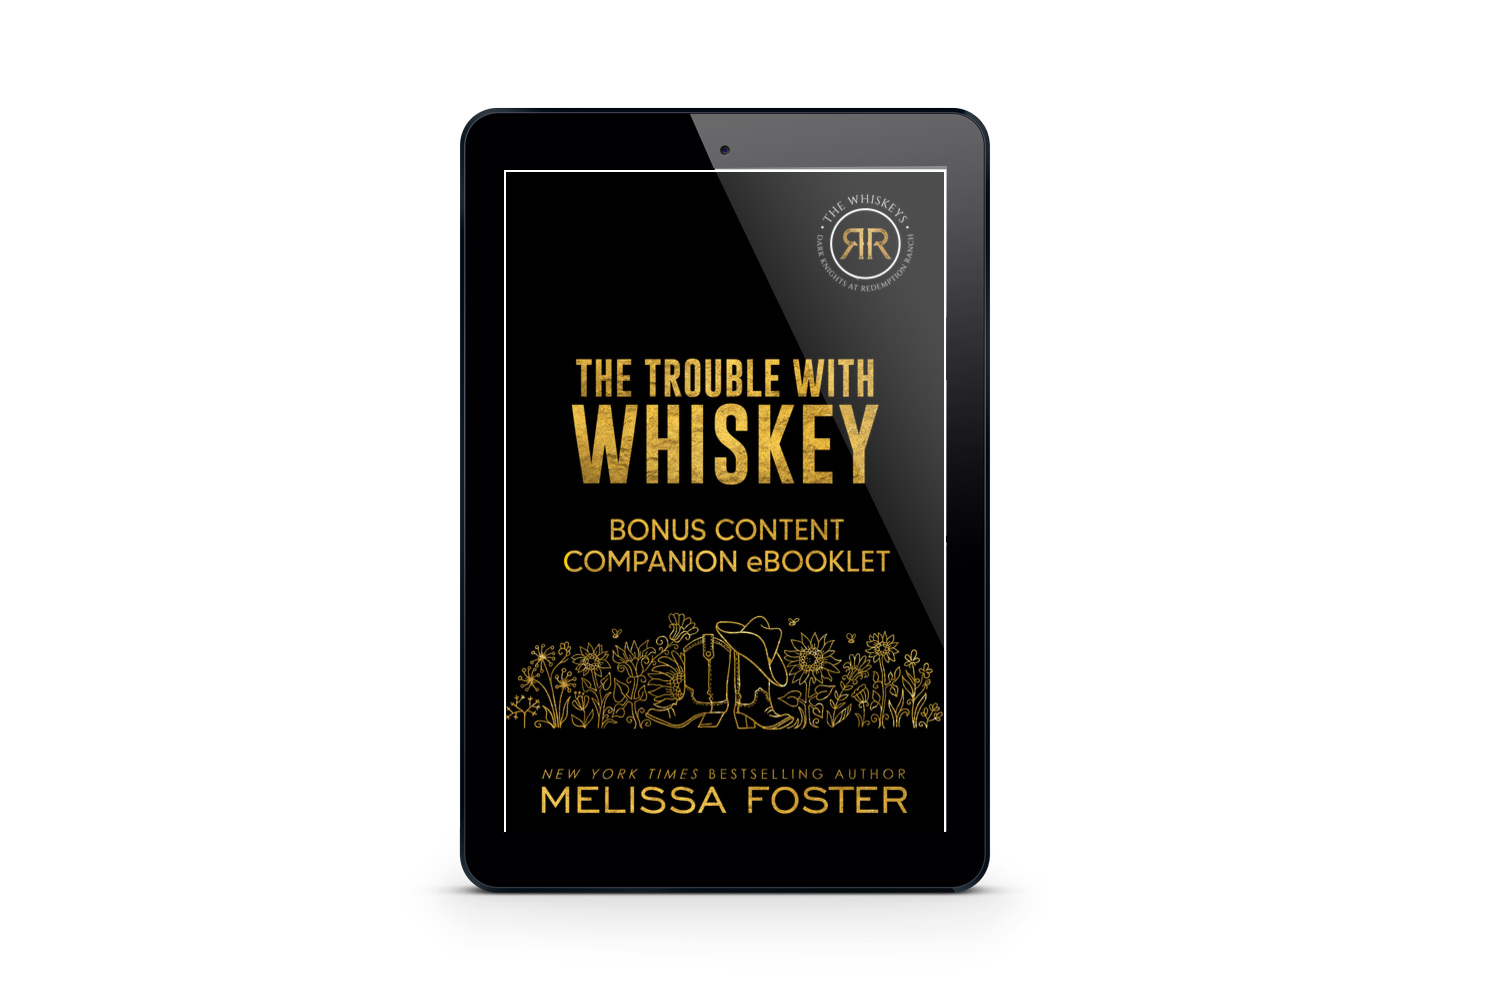 The Trouble with Whiskey Companion eBooklet